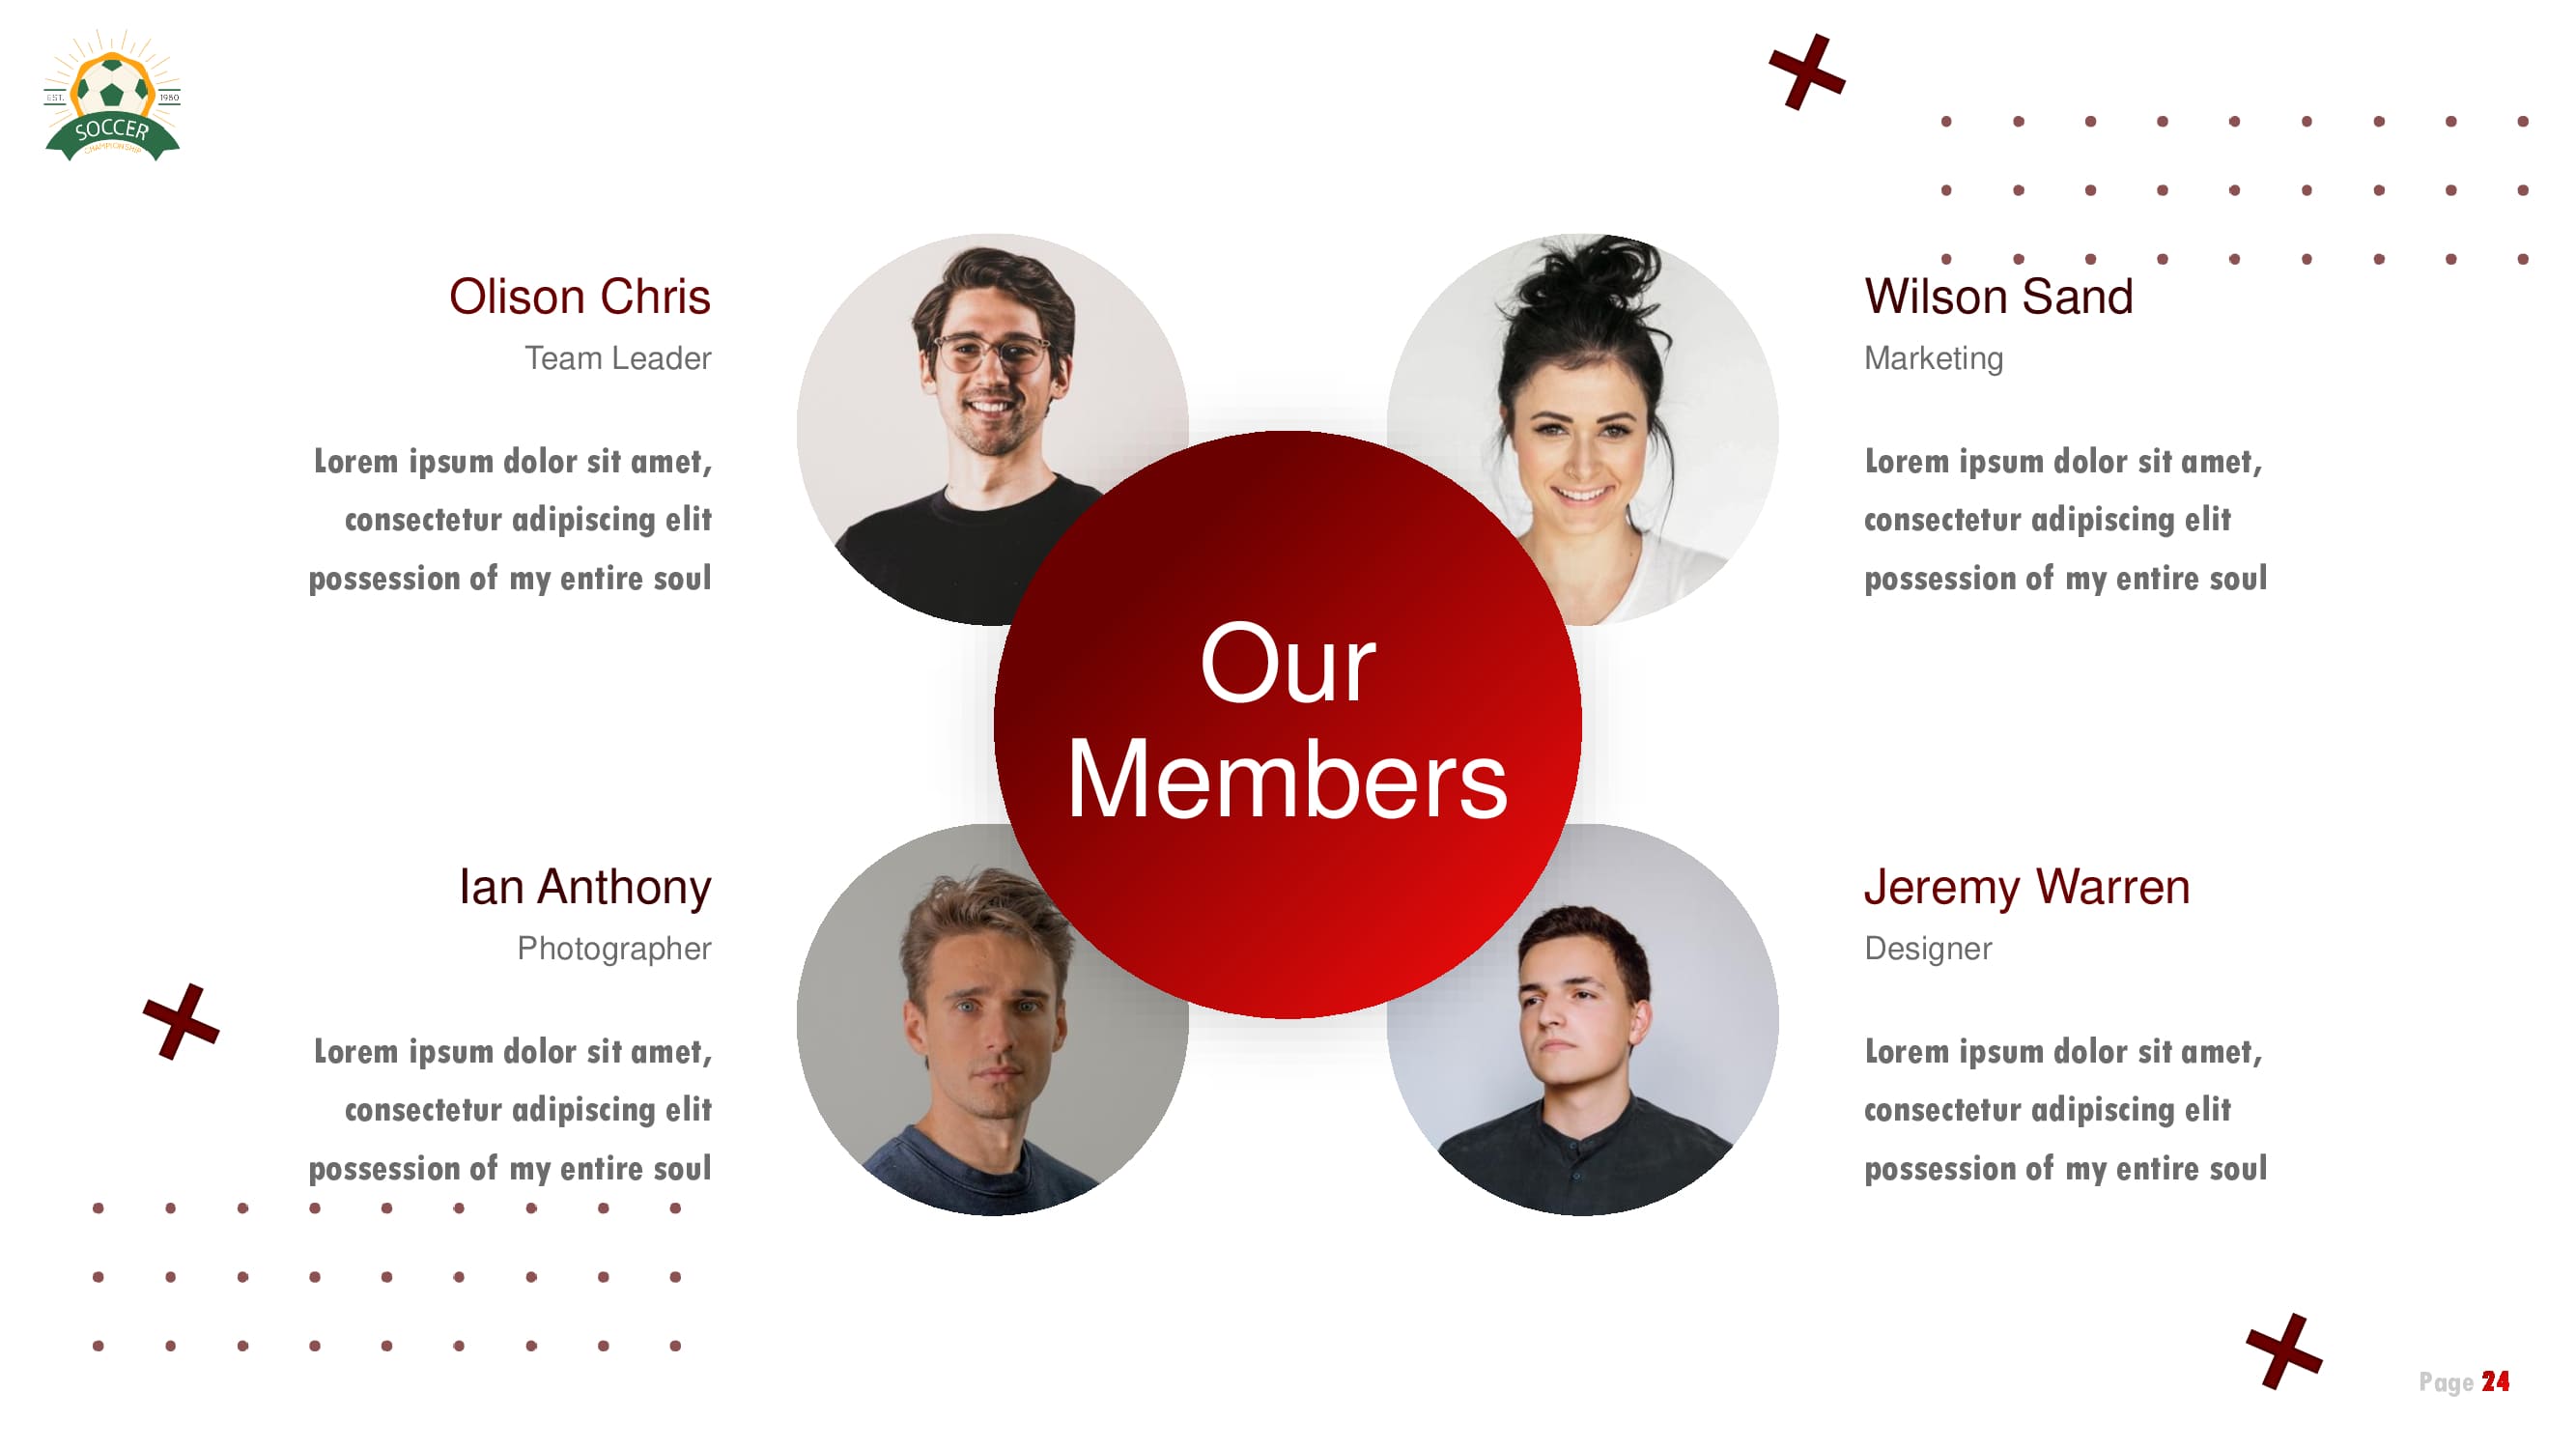 Cool white slide for your members with their photos, qualifications and descriptions.